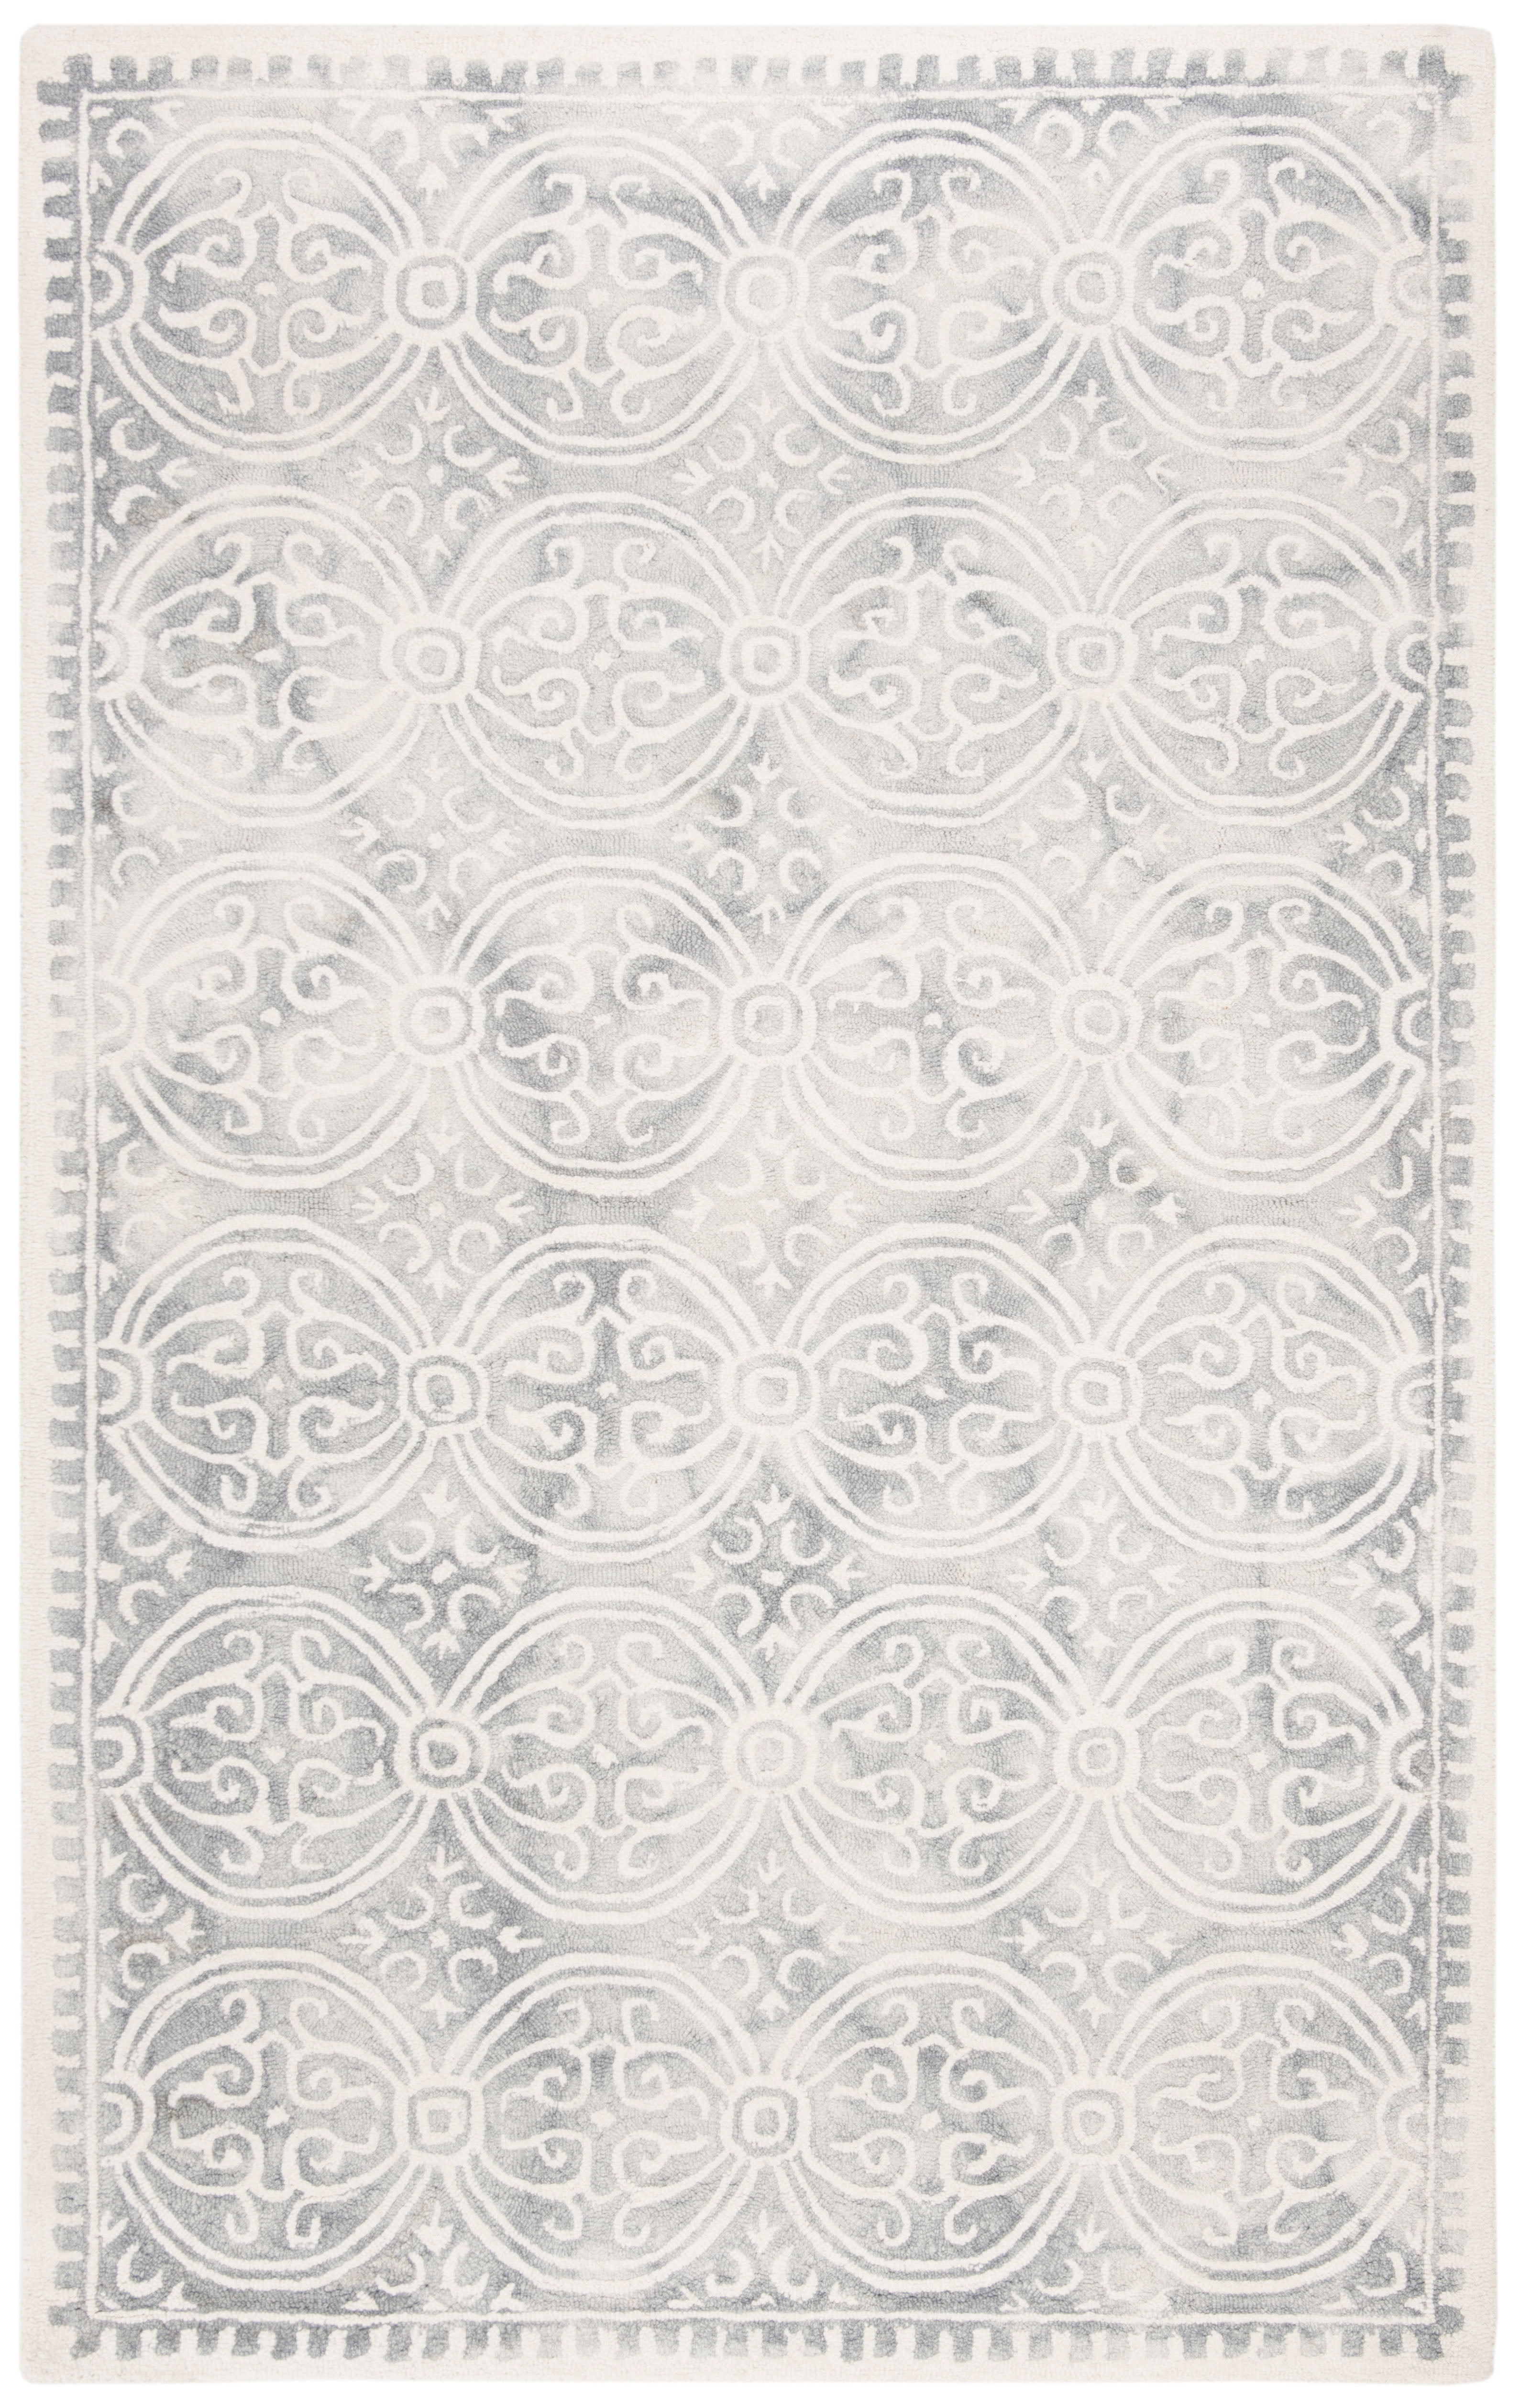 7' x 7' Square Safavieh Dip Dye Collection DDY211G Handmade Premium Wool Area Rug Ivory Silver